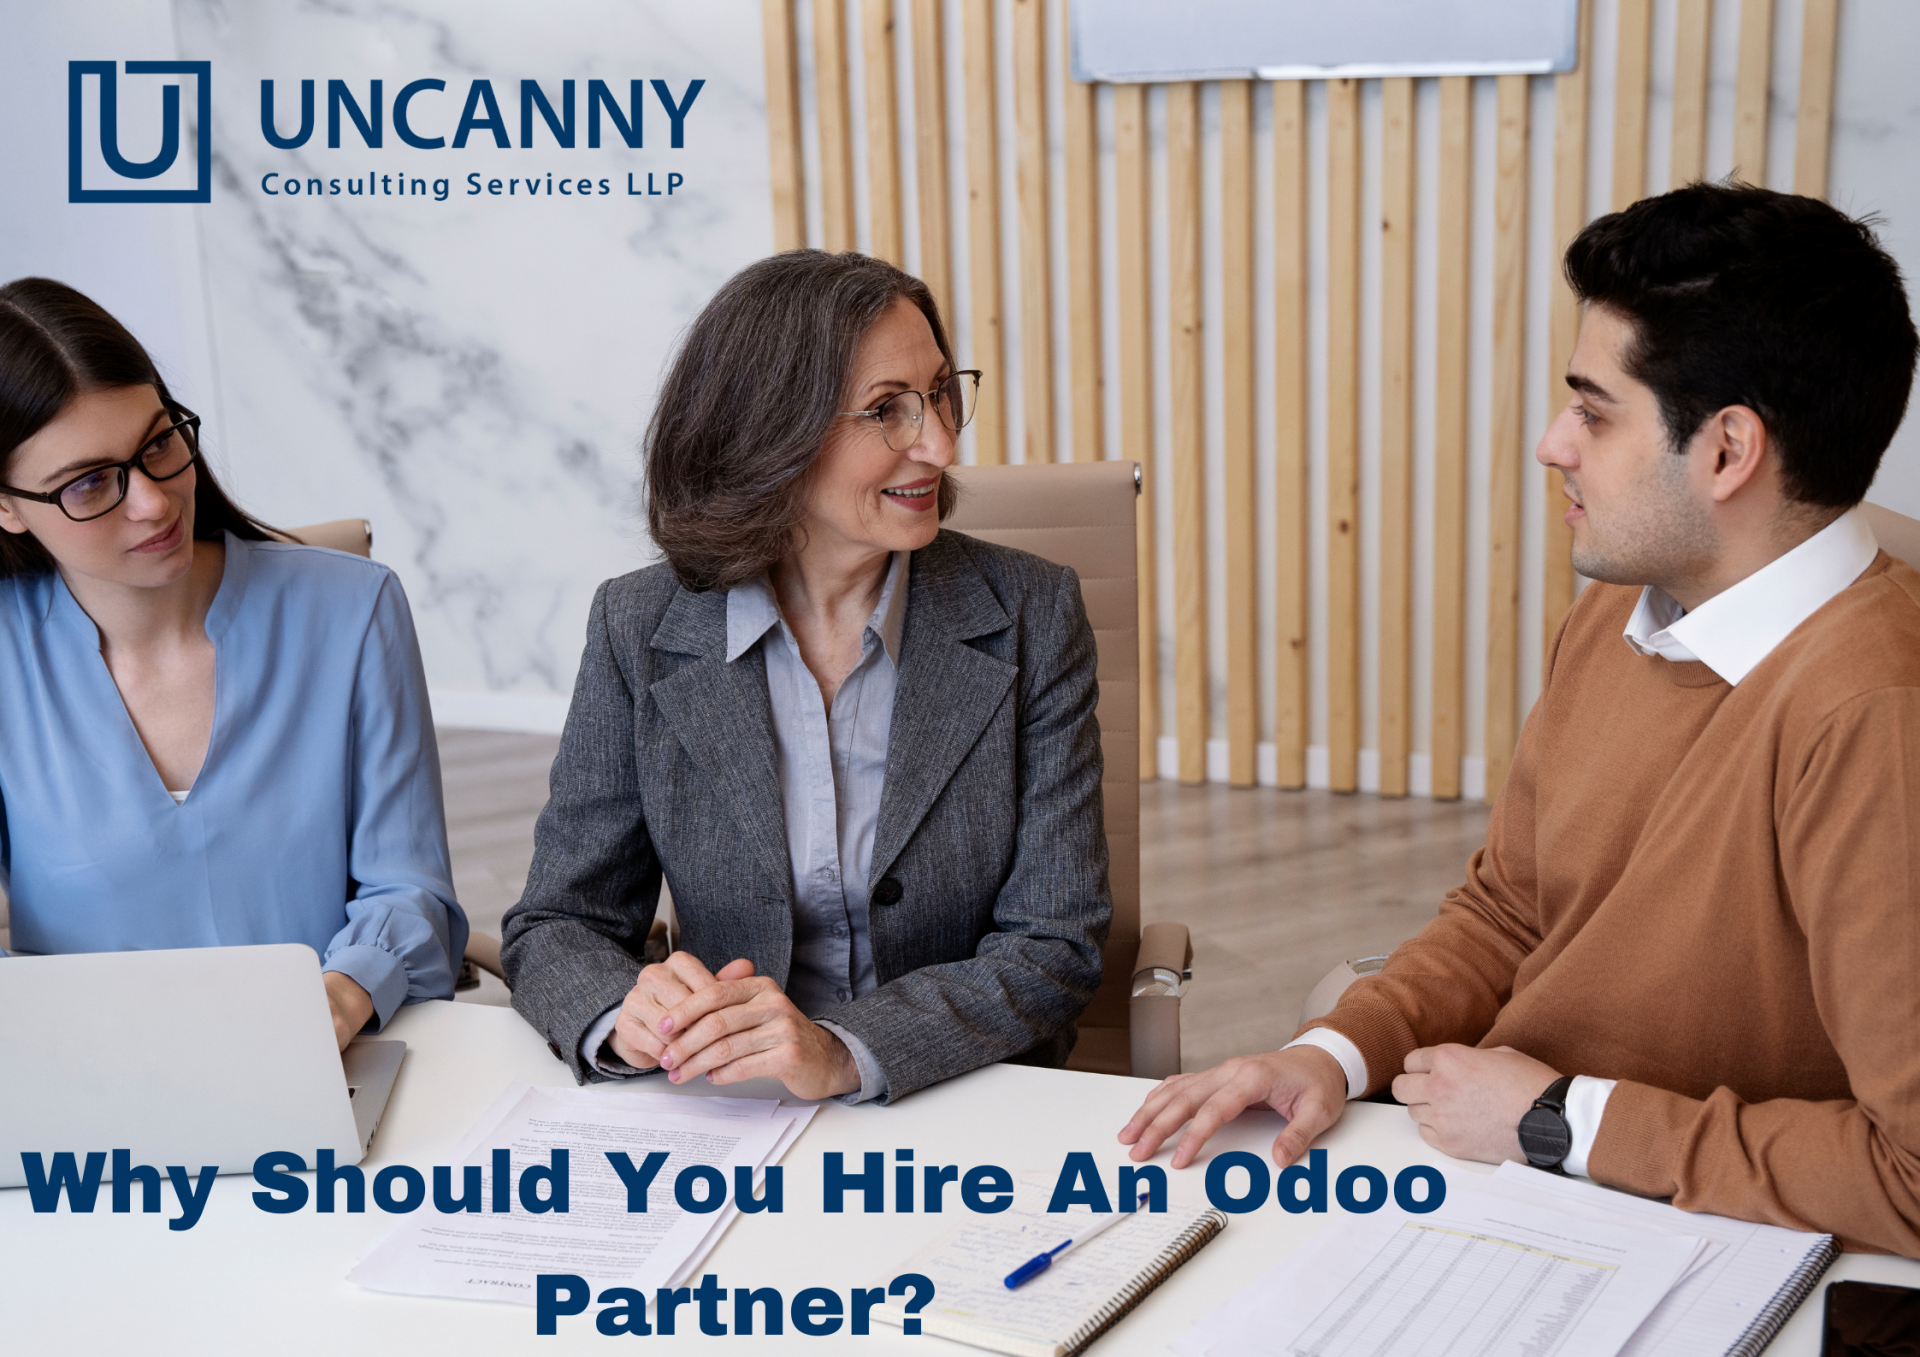 Why Should You Hire An Odoo Partner?